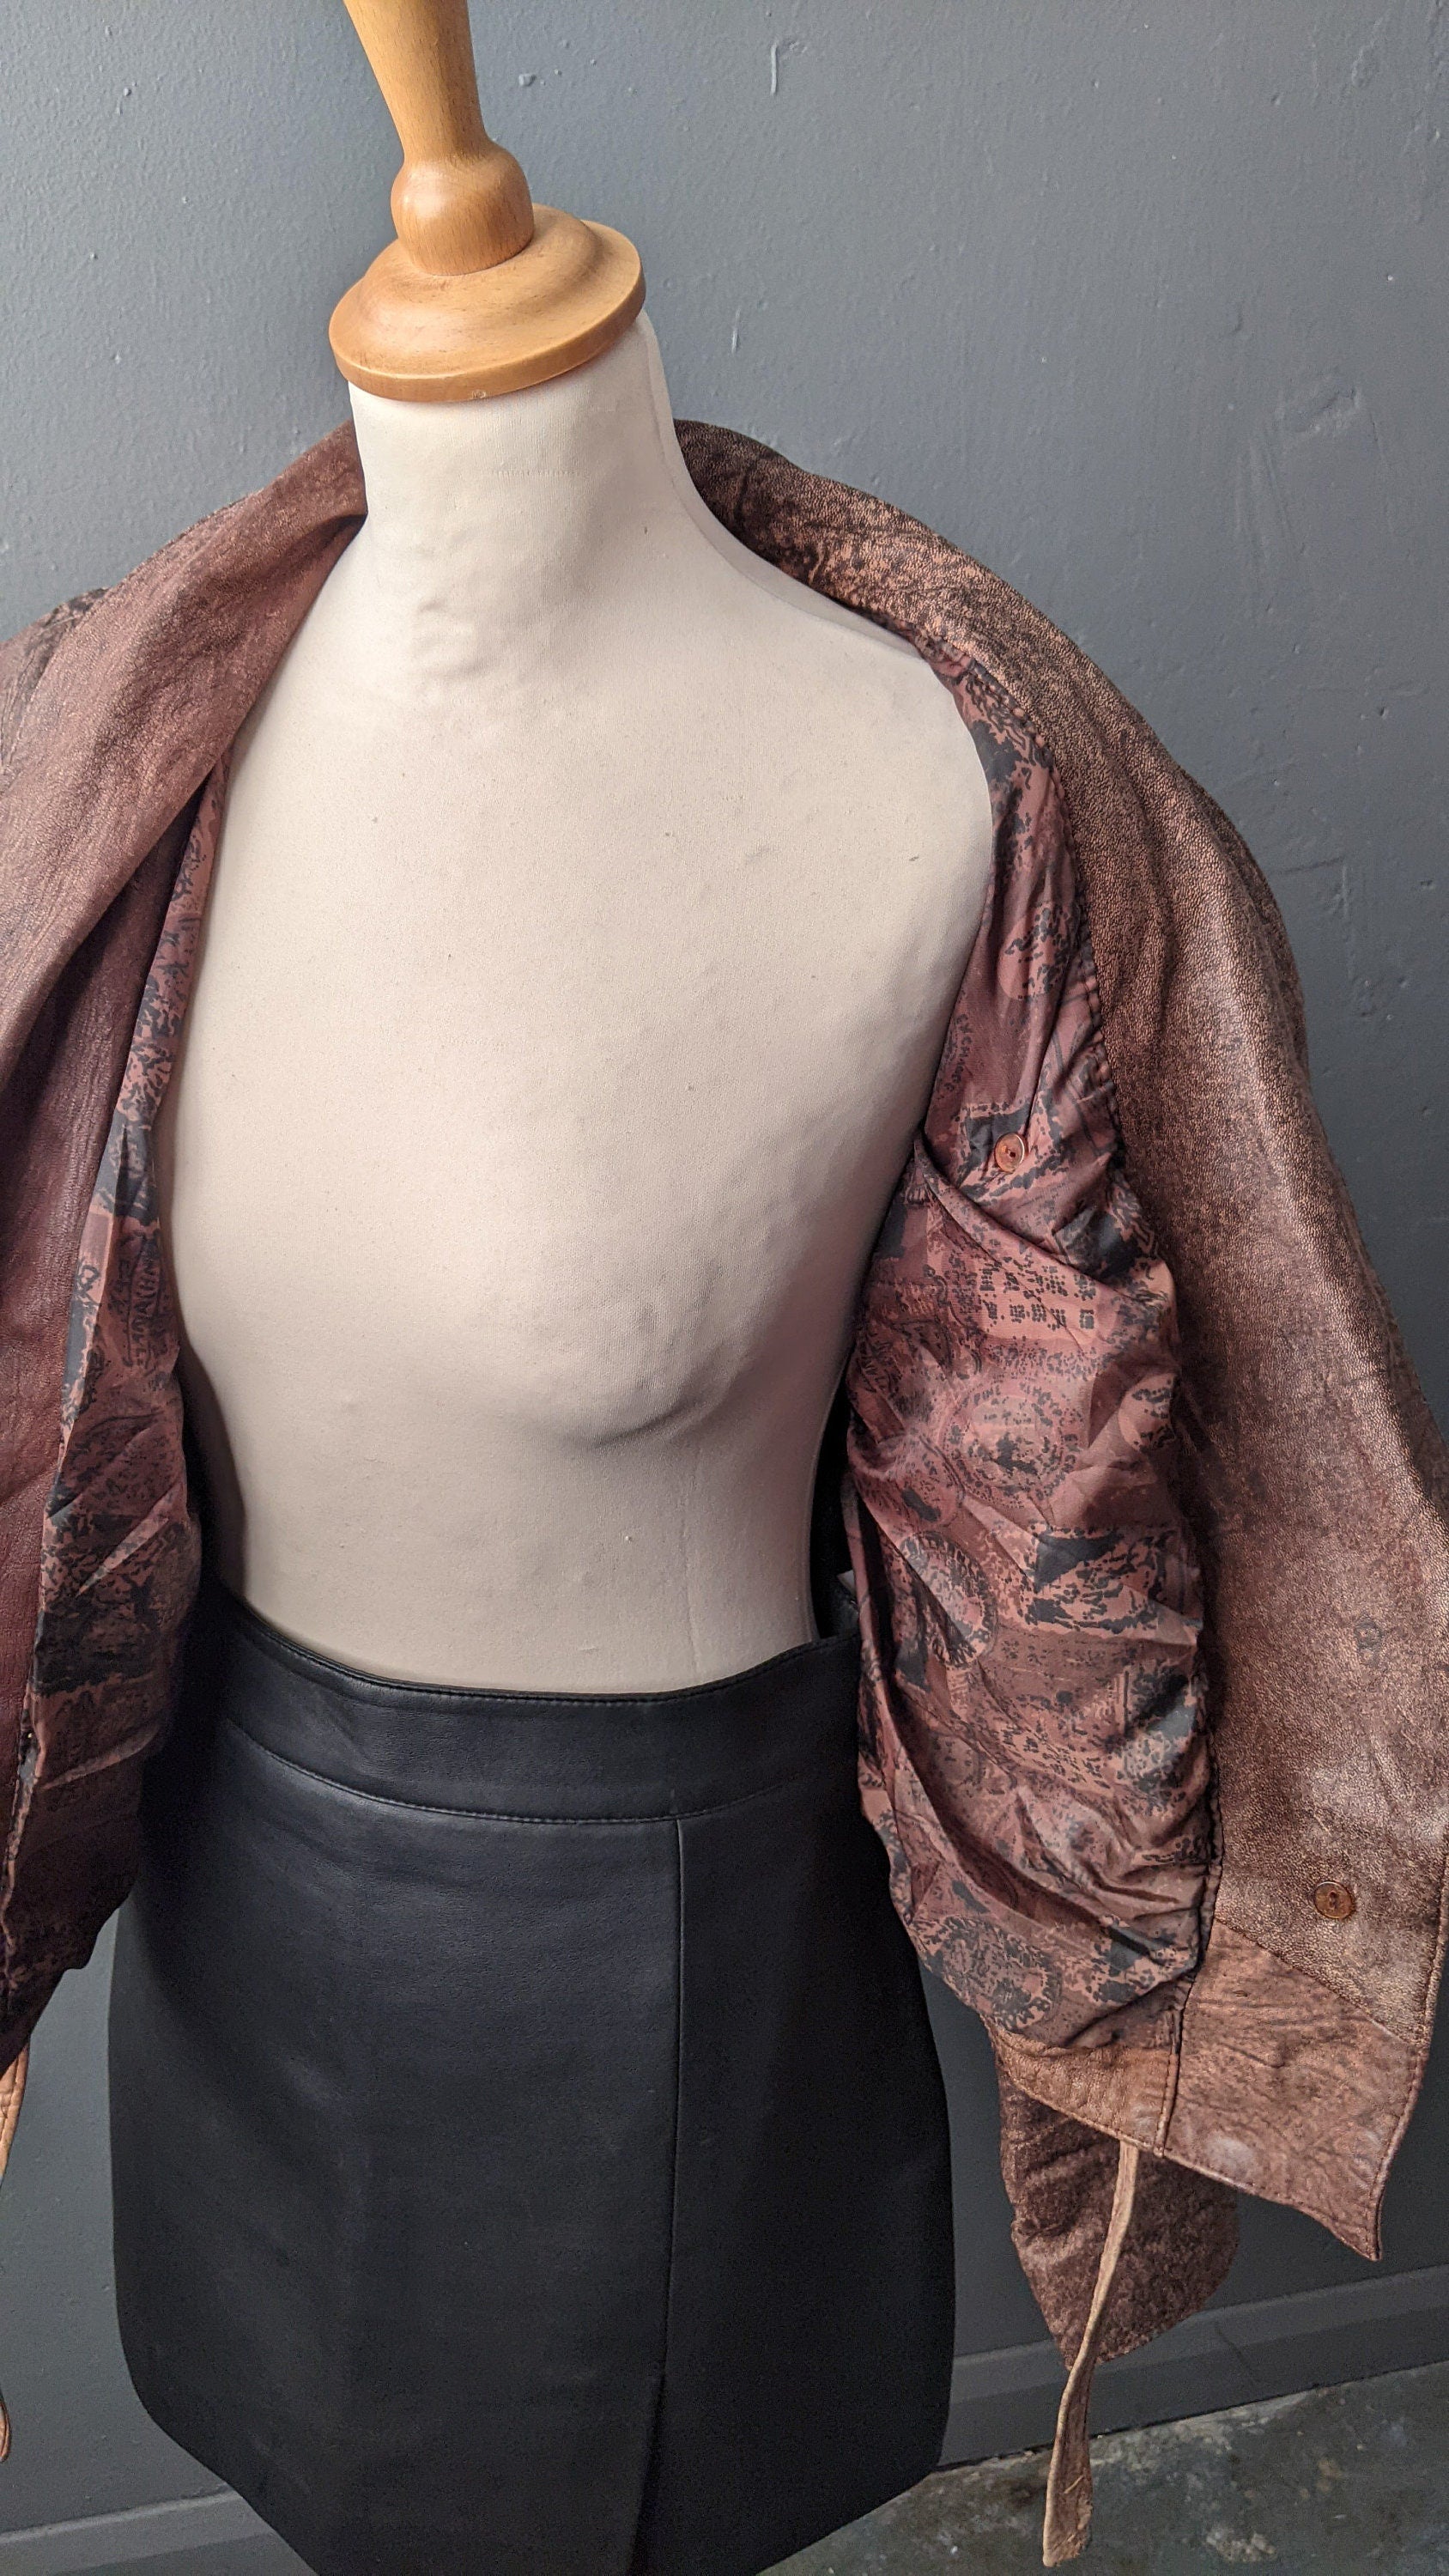 Vintage 80s Leather Coat, Eighties Dystopia Laced Biker Jacket, Size Small Medium